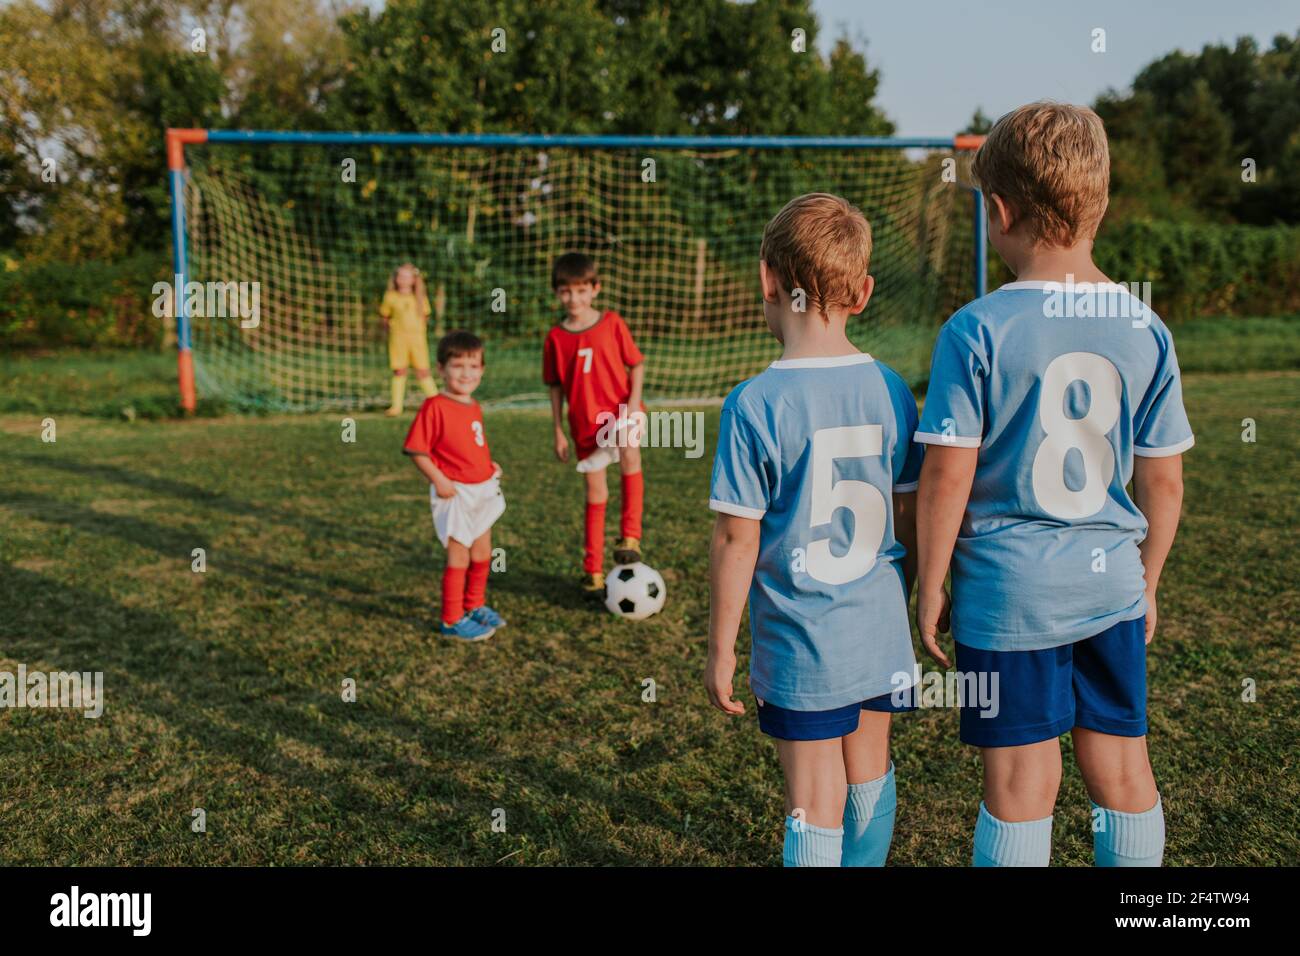 Children playing amateur football. Kids in teams wearing soccer dresses playing soccer in field at sunset. Stock Photo